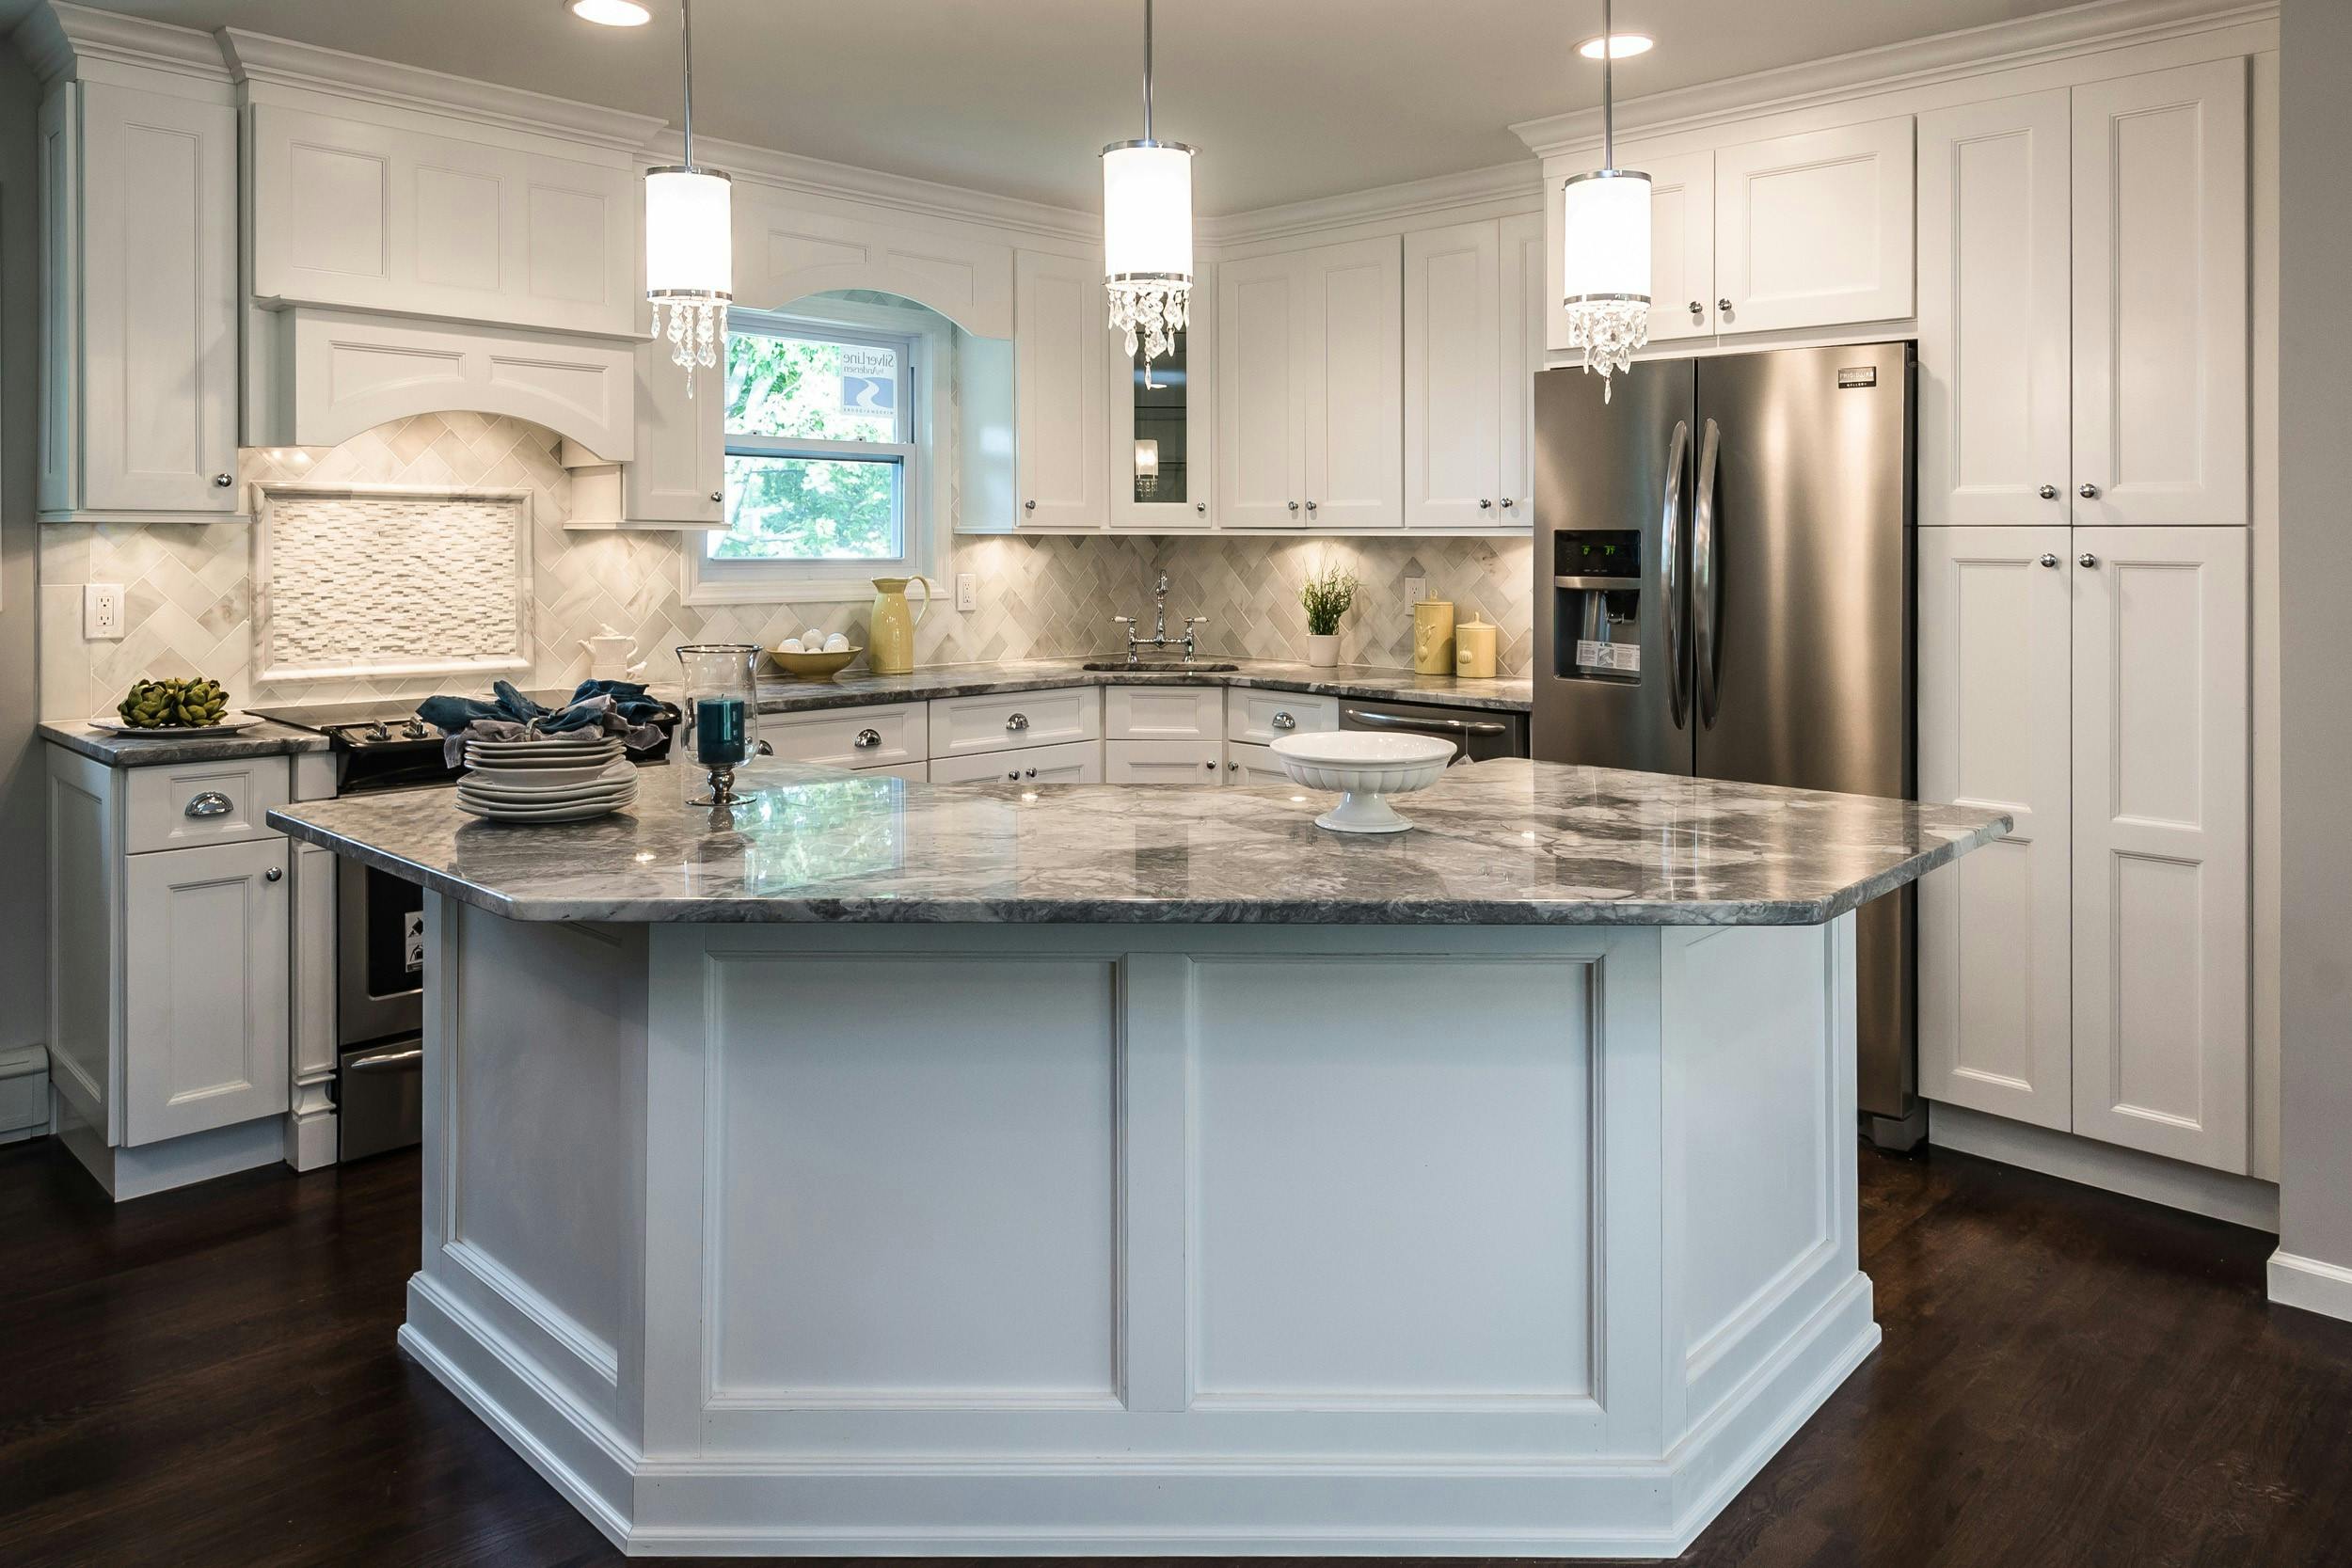 Kitchen Countertops And Cabinets, How To Match Cabinets Countertops And Flooring